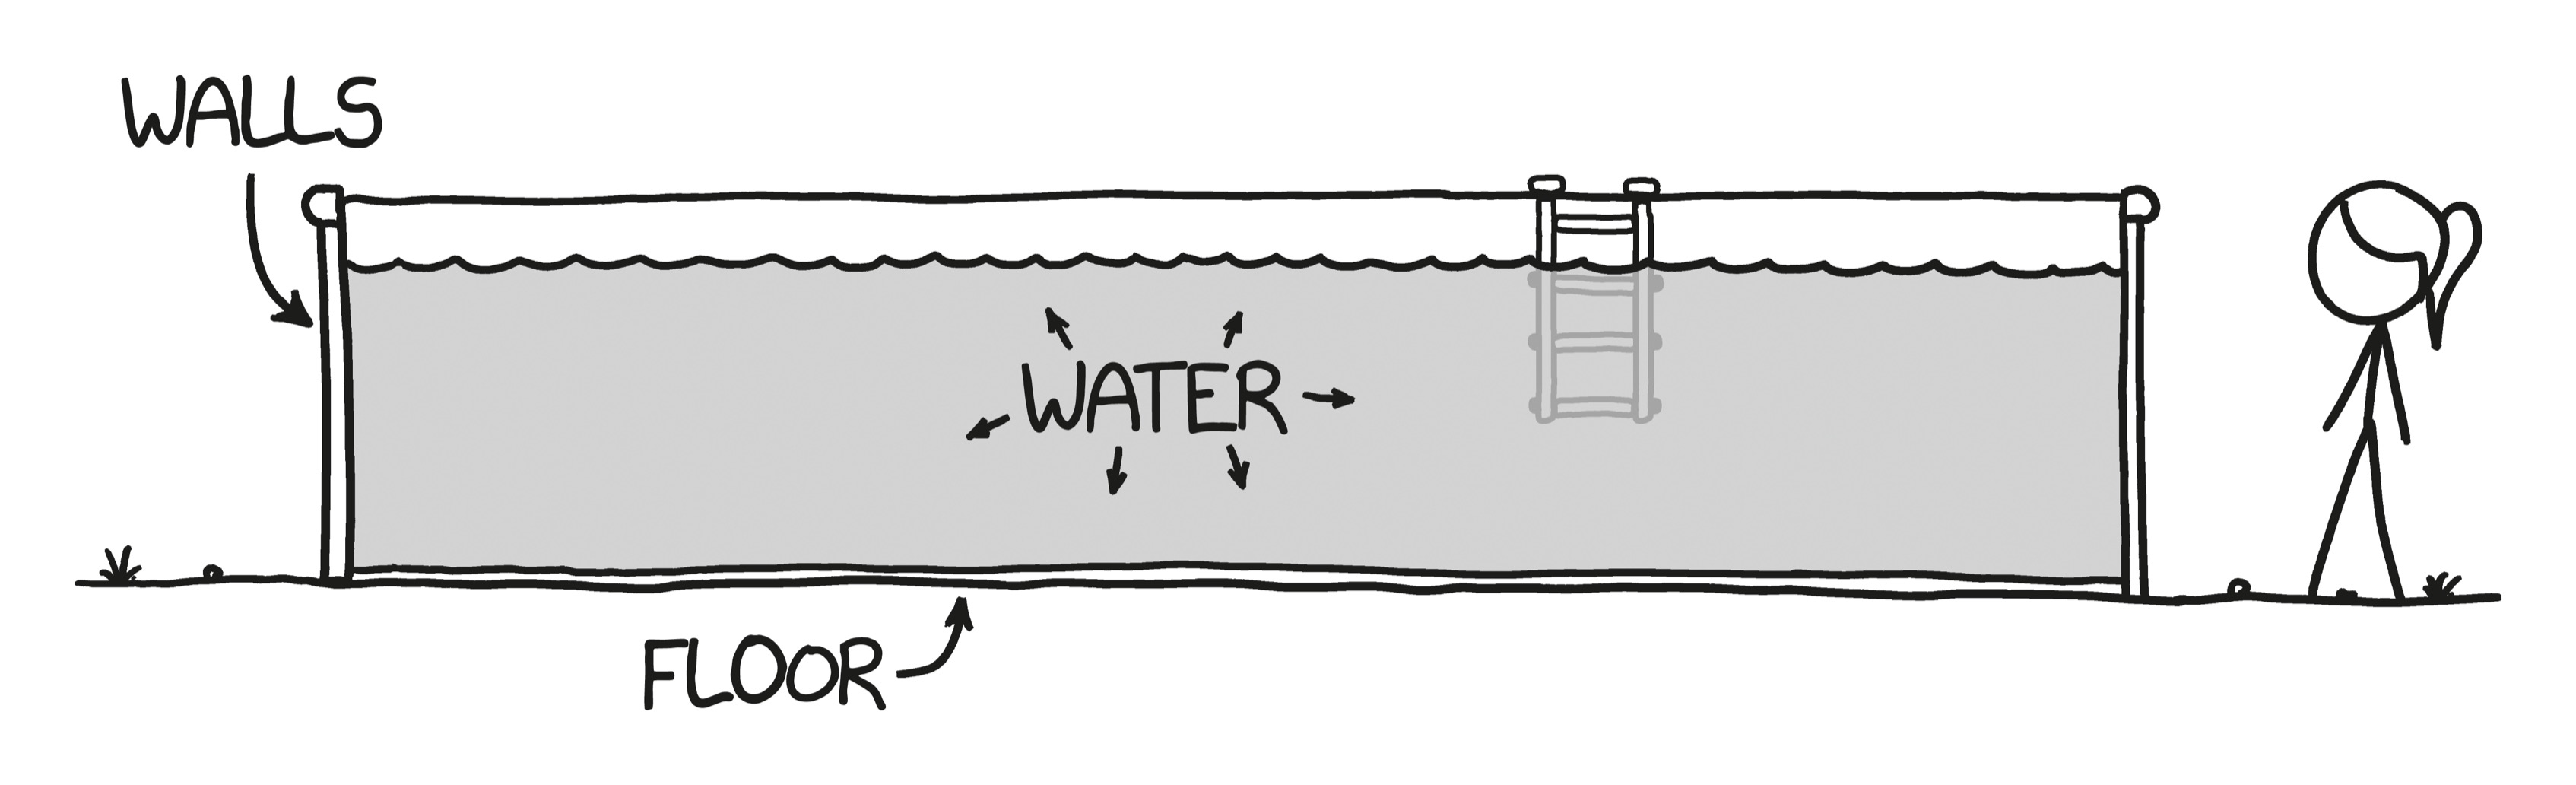 Cross-section illustration of a rectangular pool with labels showing two sidewalls, a floor, and water in the middle.